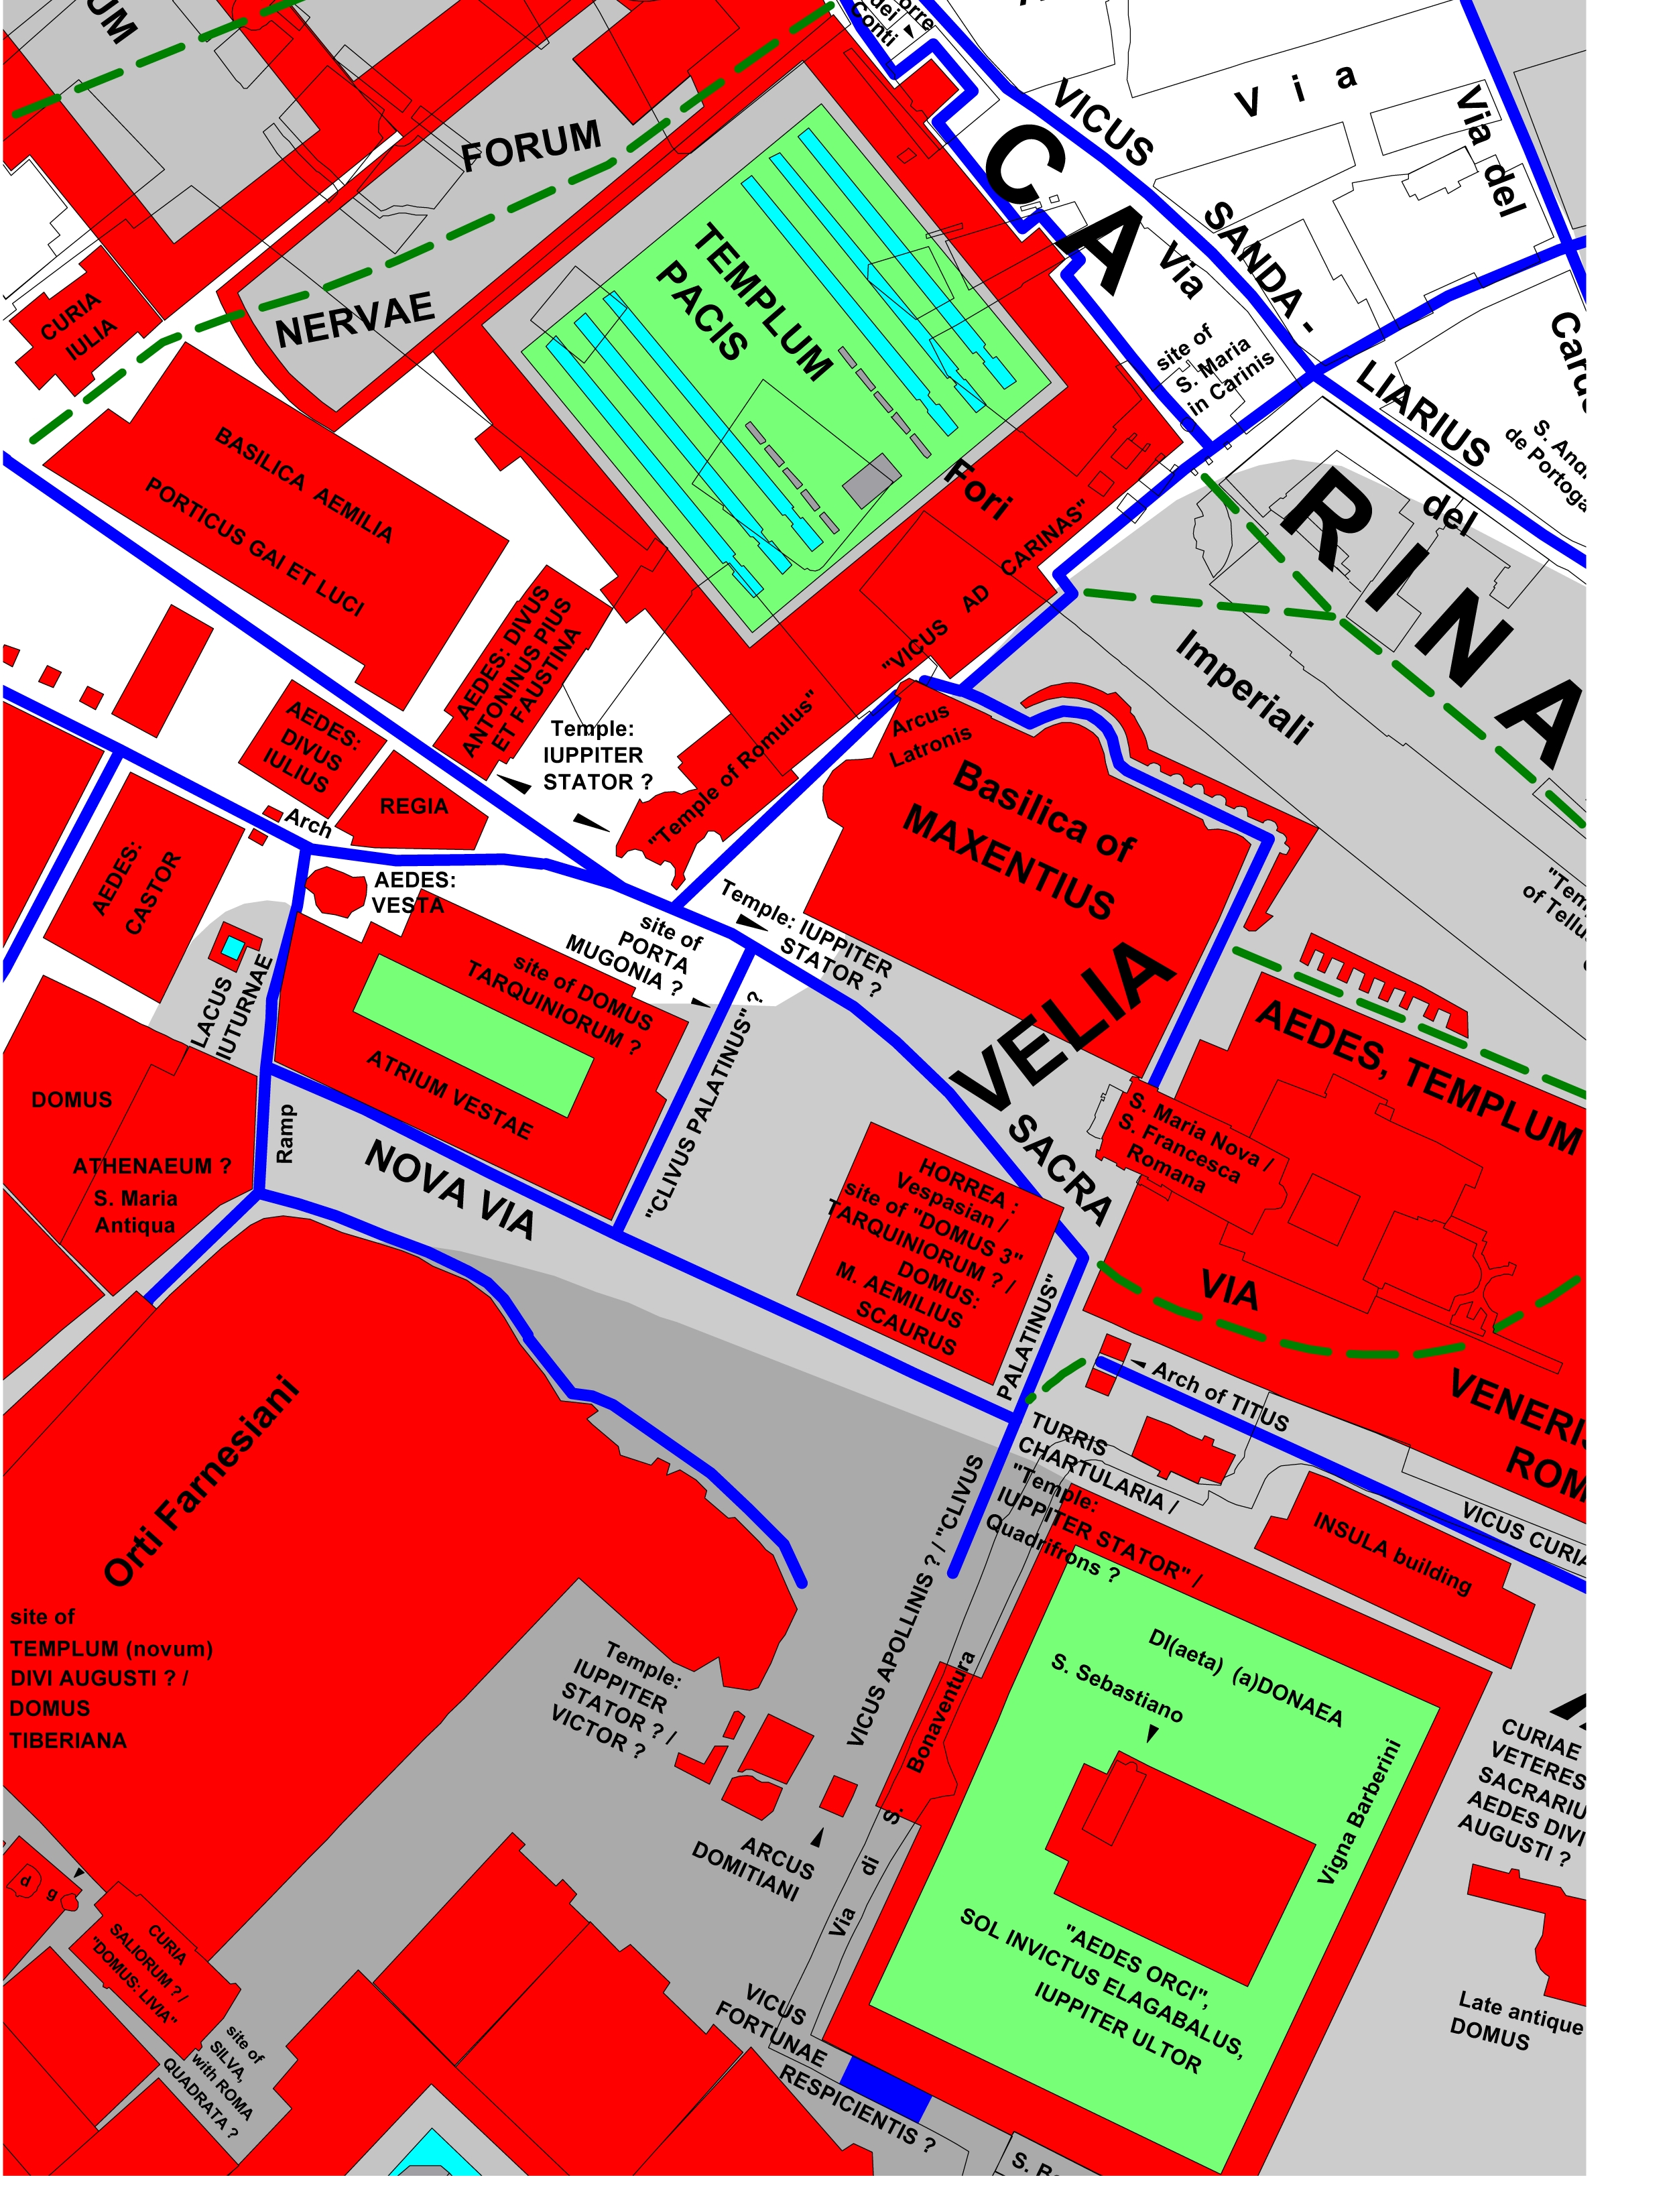 Fig. 4. Map showing the five different locations suggested for the temple of Iuppiter Stator. C. Häuber, AIS ROMA aus Chrystina Häuber 2014